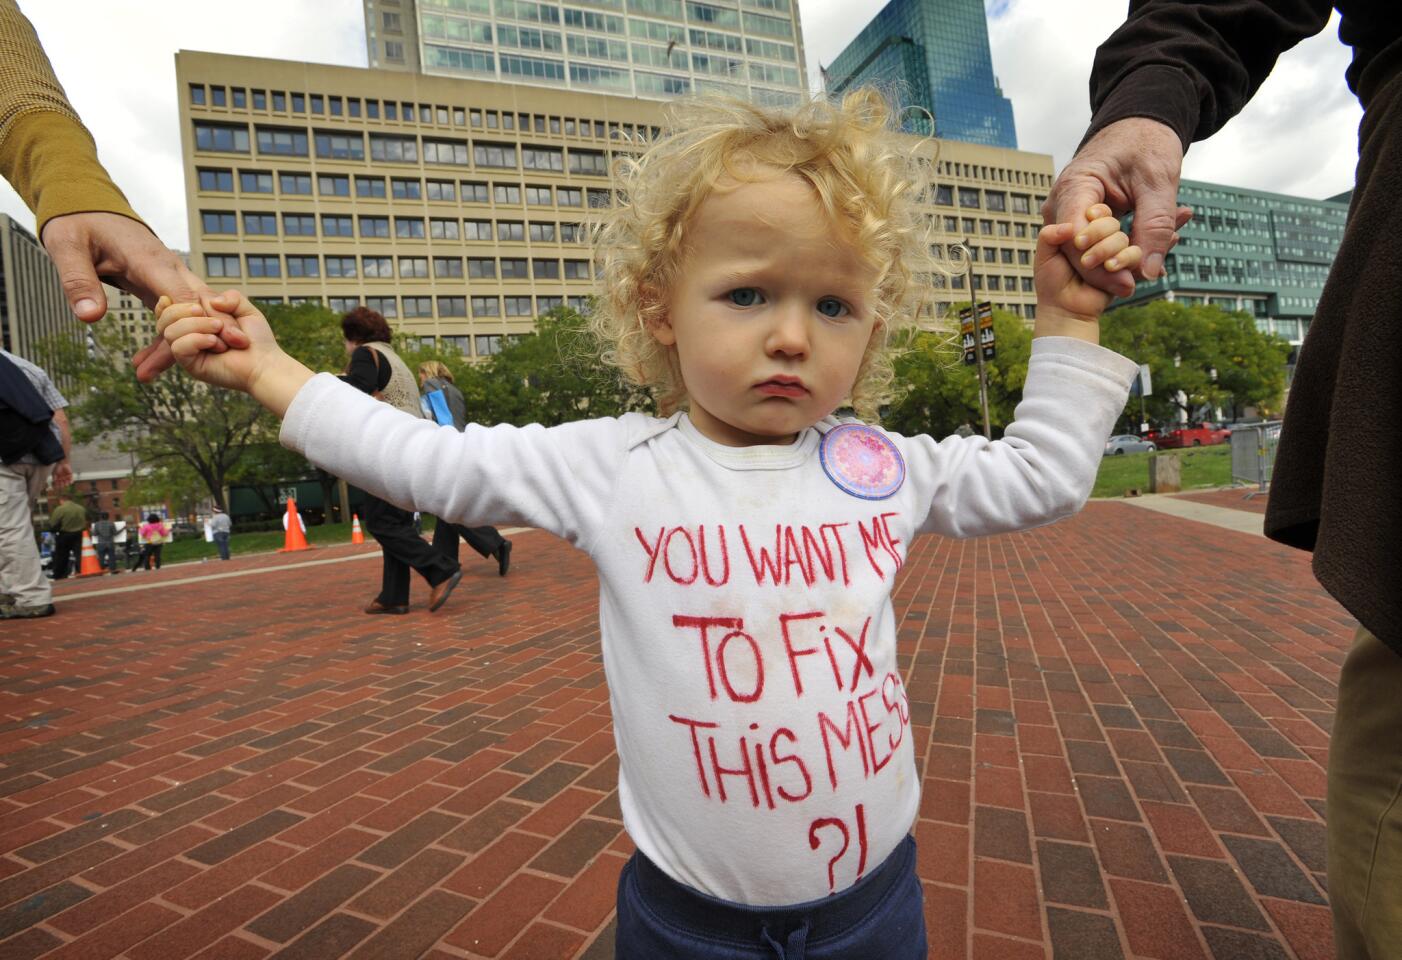 Youthful protester